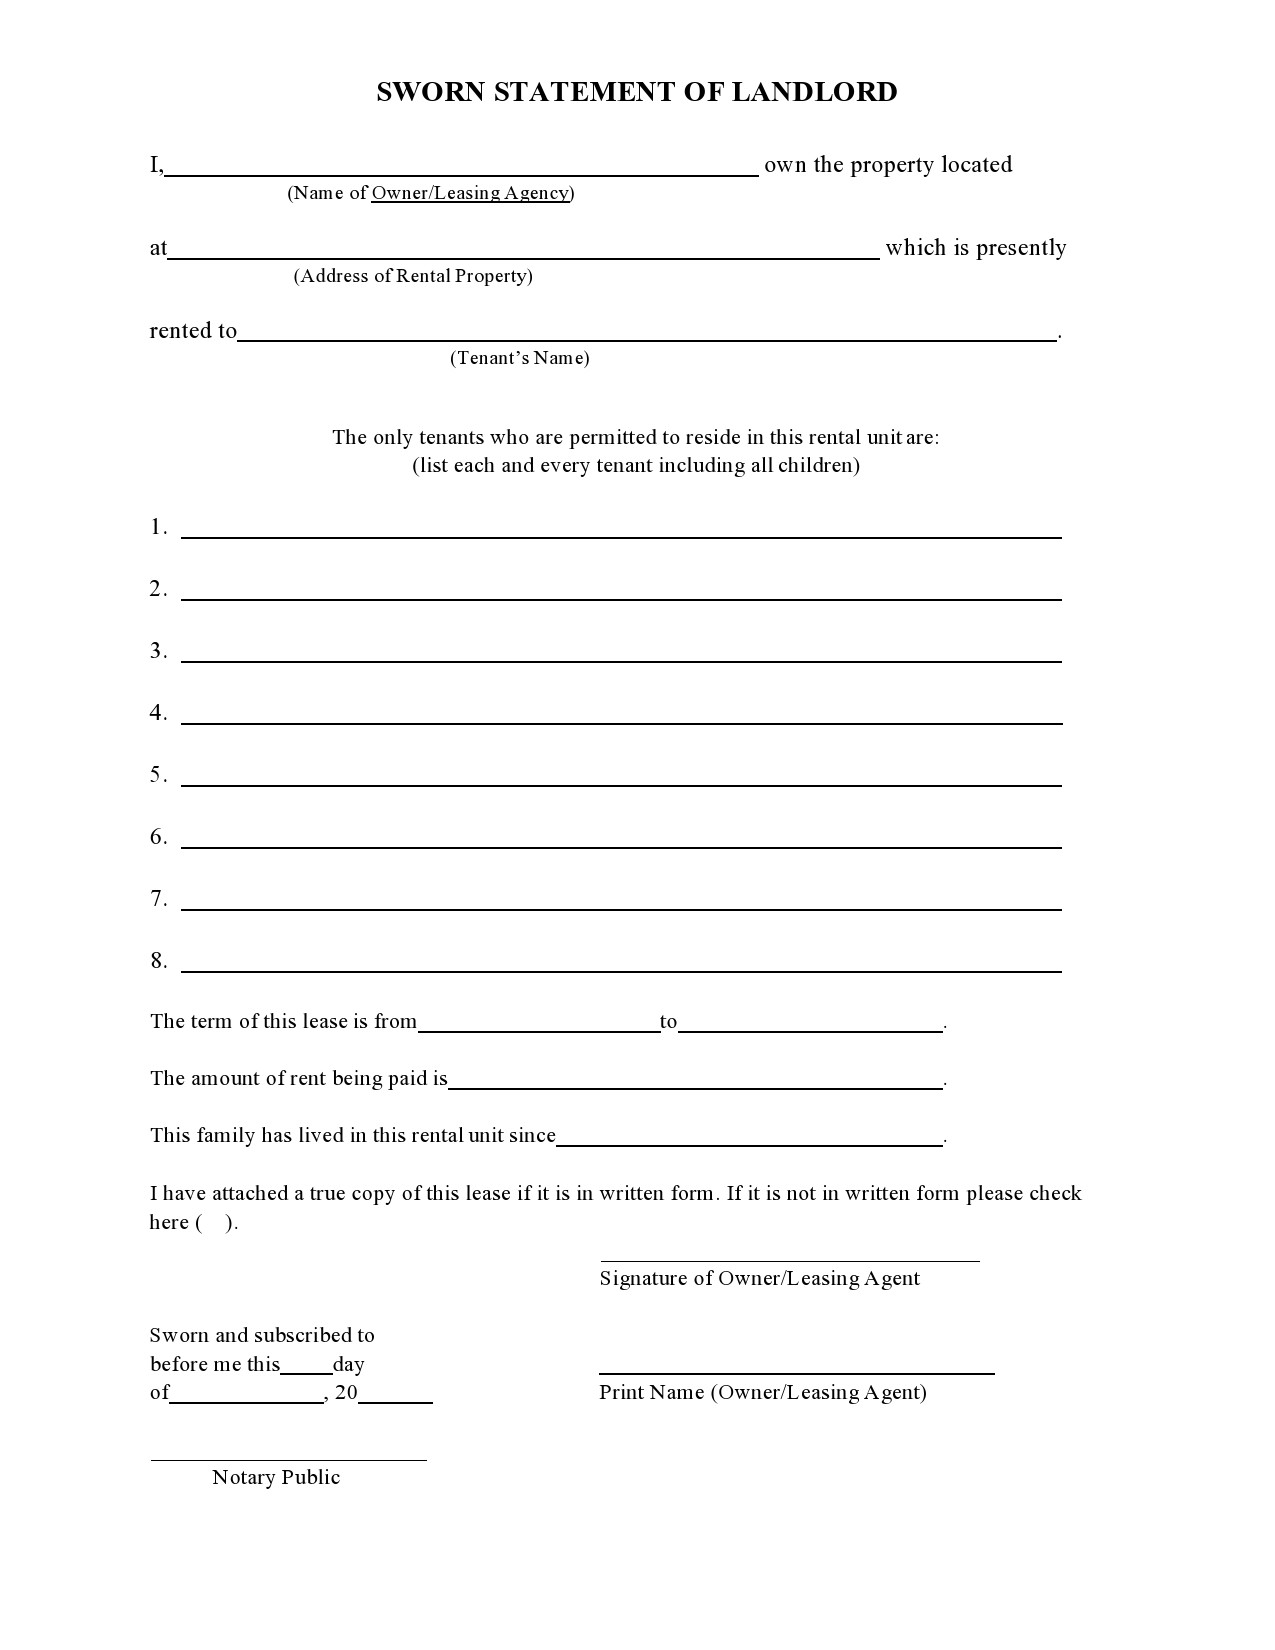 43-perfect-landlord-statement-forms-letters-templatelab